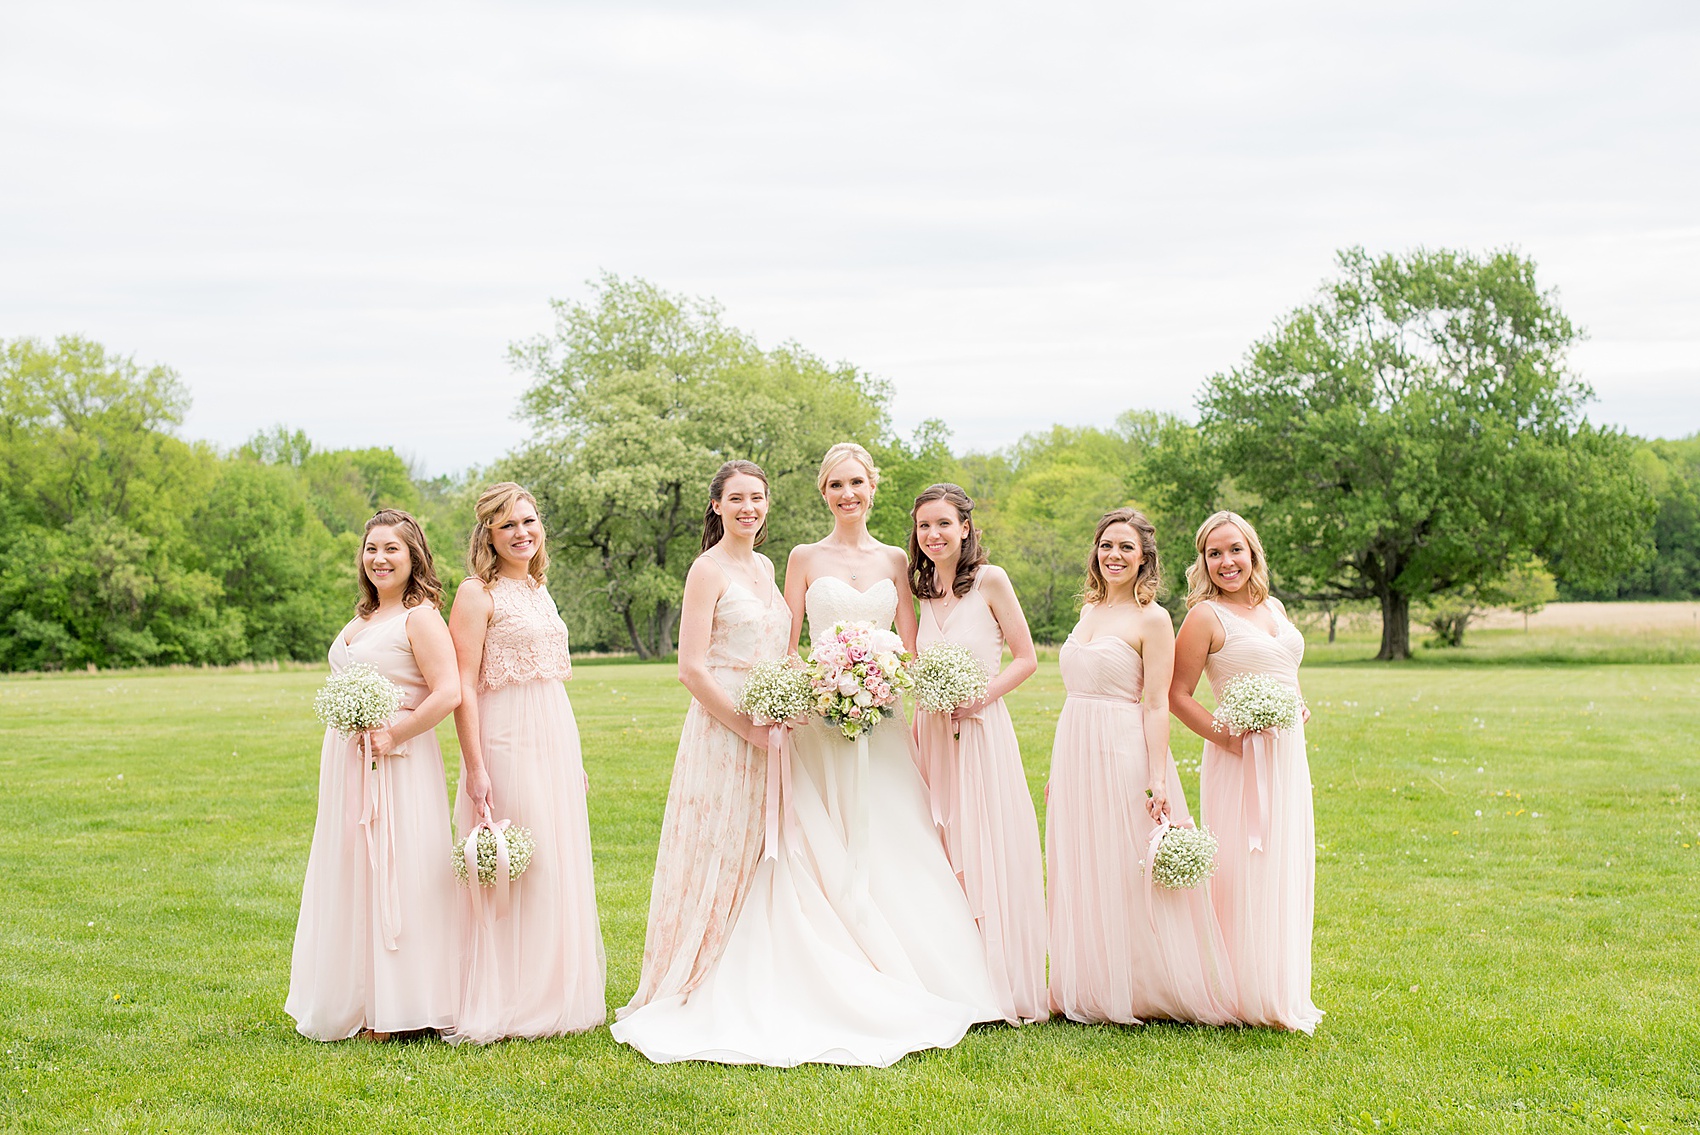 Waveny House wedding photos in Connecticut by Mikkel Paige Photography. Creative picture of the bride in a strapless gown with her bridesmaids in pink dresses, and maid of honor in a pink floral pattern gown. Bridesmaids held Baby's Breath bouquets.